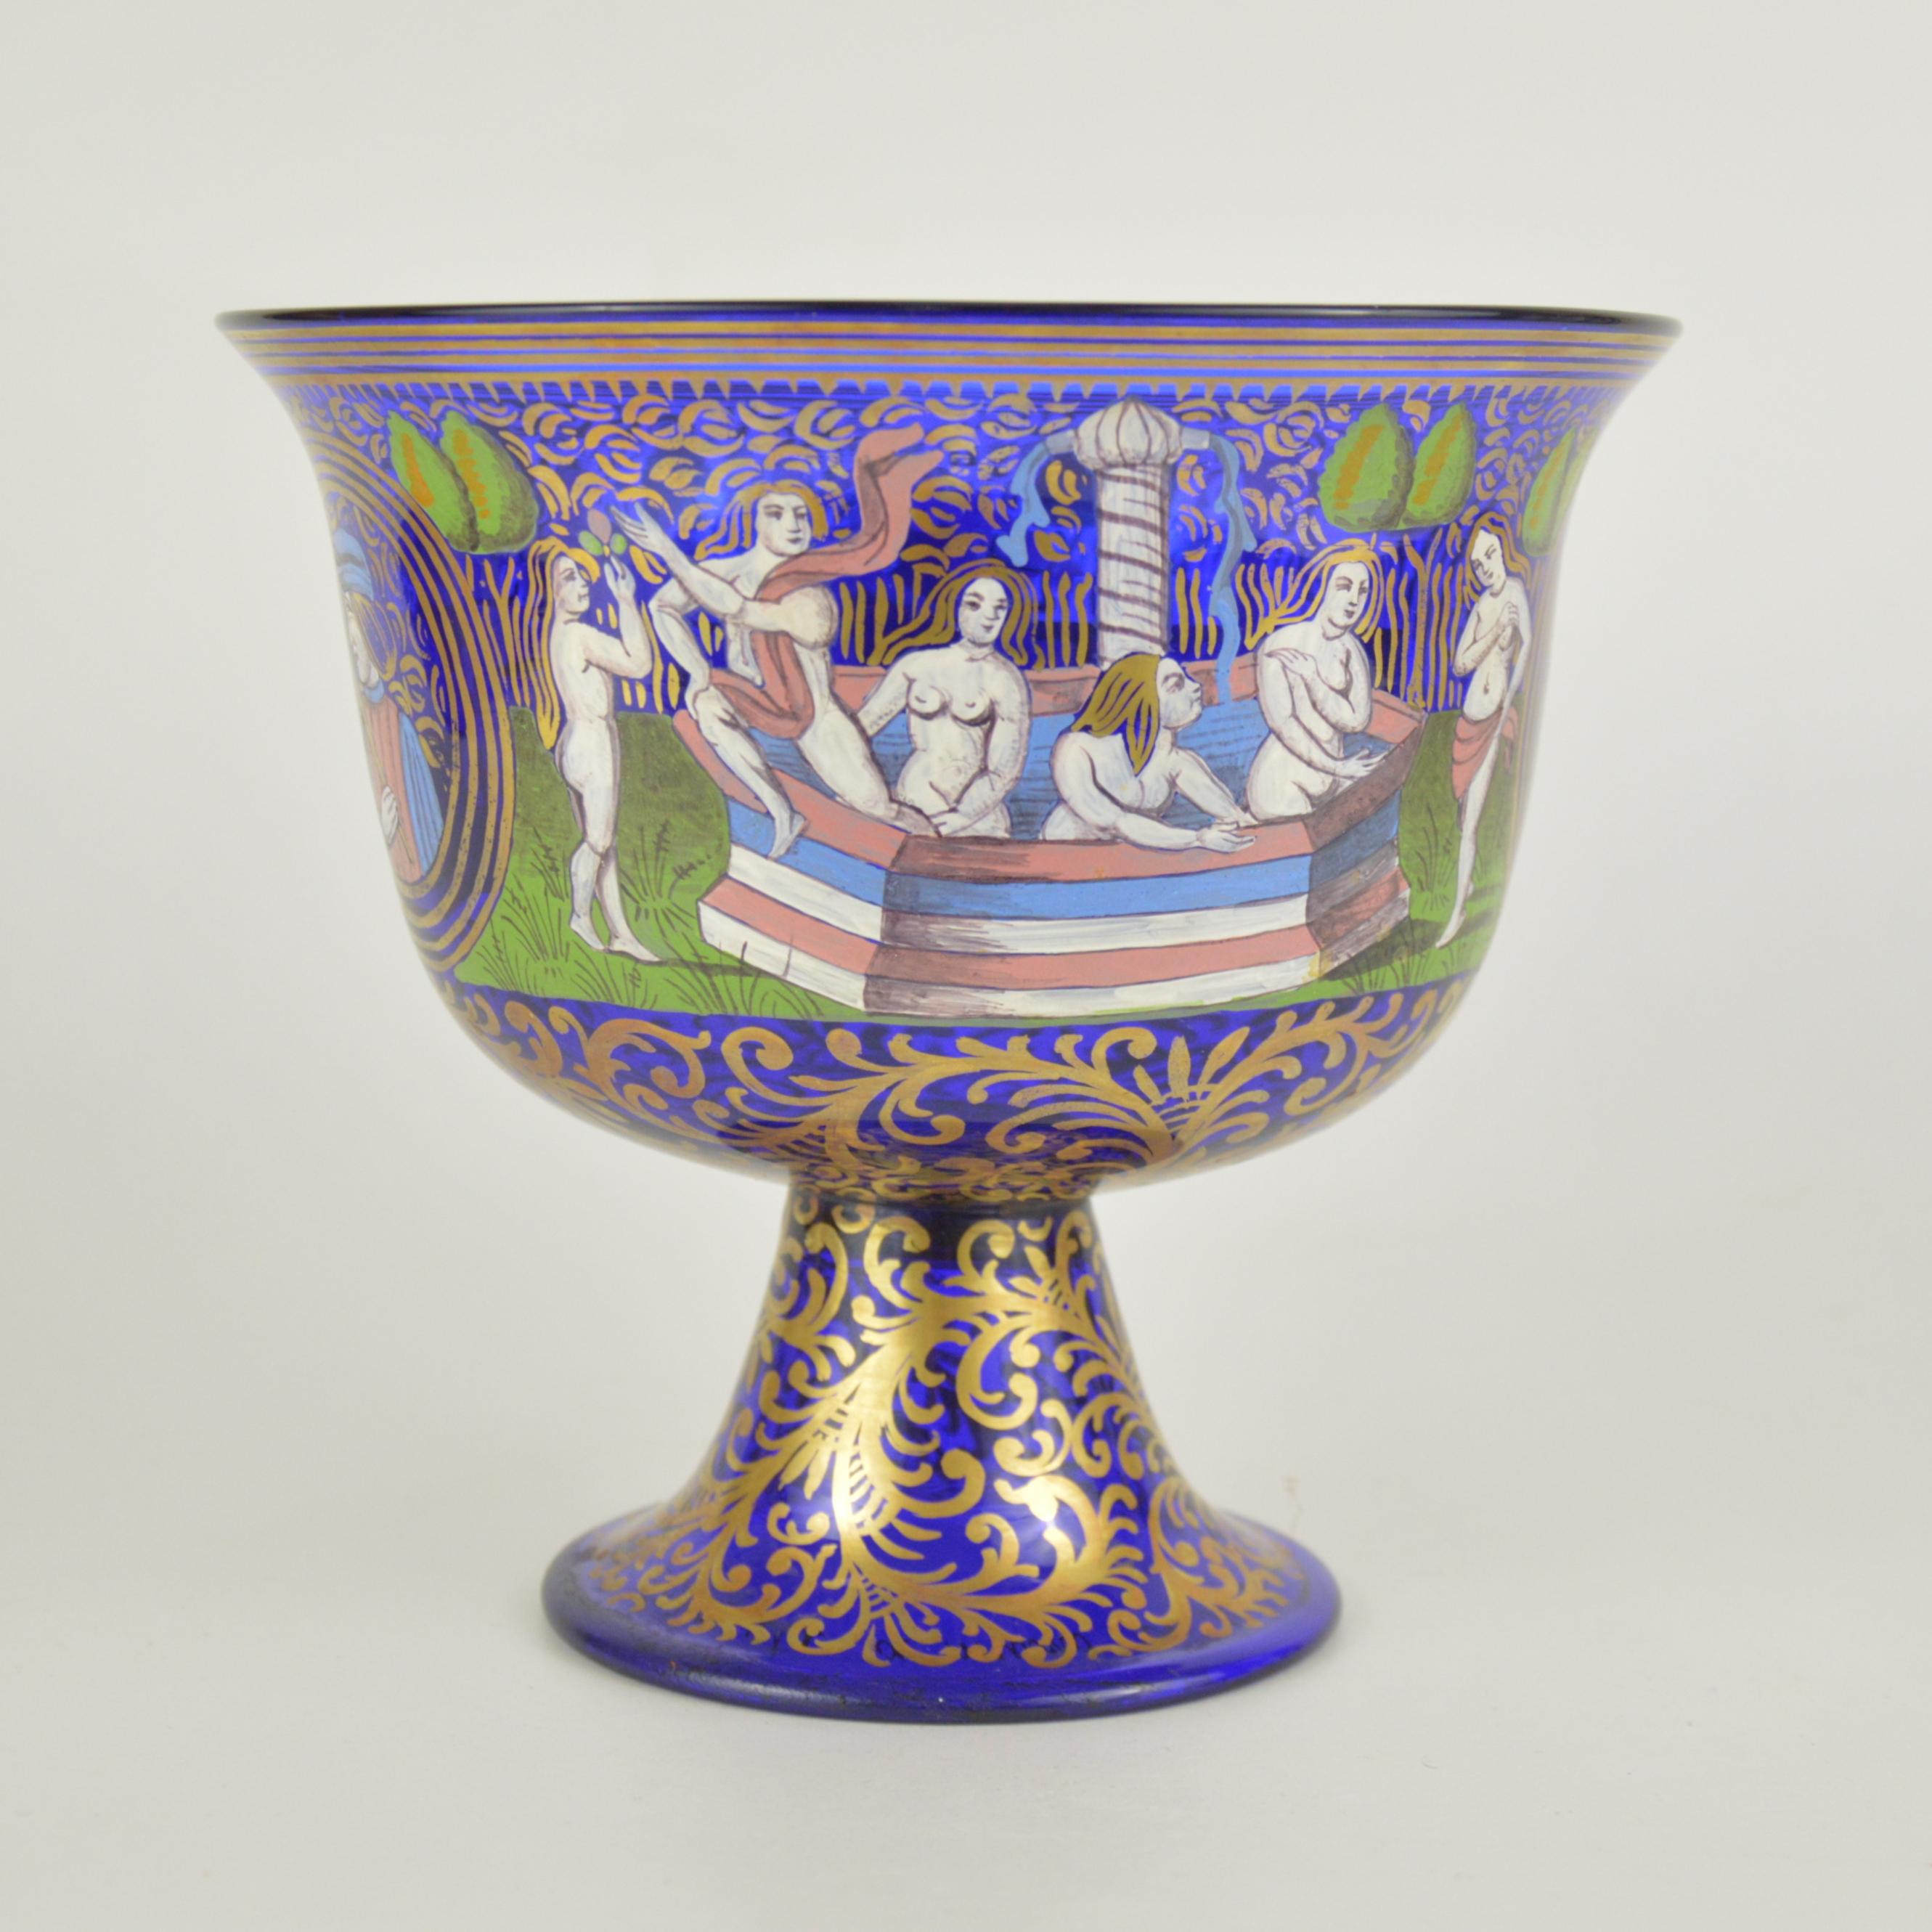 Wedding Murano Cobalt Glass Cup with Enamelled Decoration Albertini Spezzamonte For Sale 1